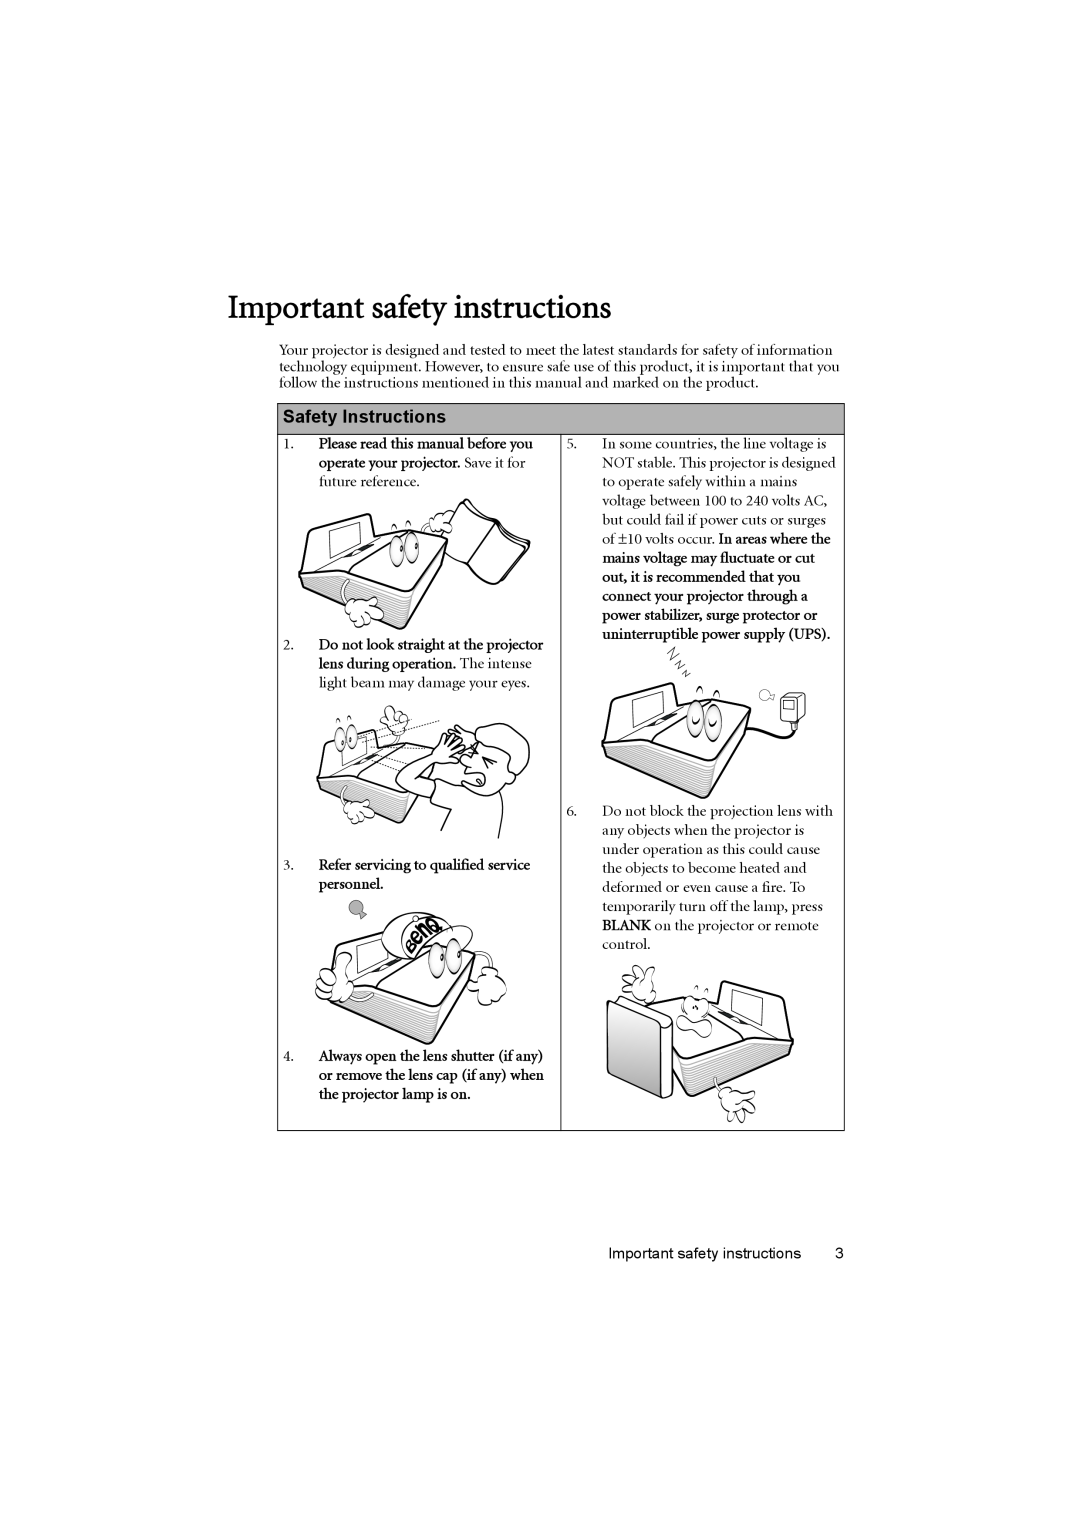 BenQ MX880UST user manual Important safety instructions, Safety Instructions 